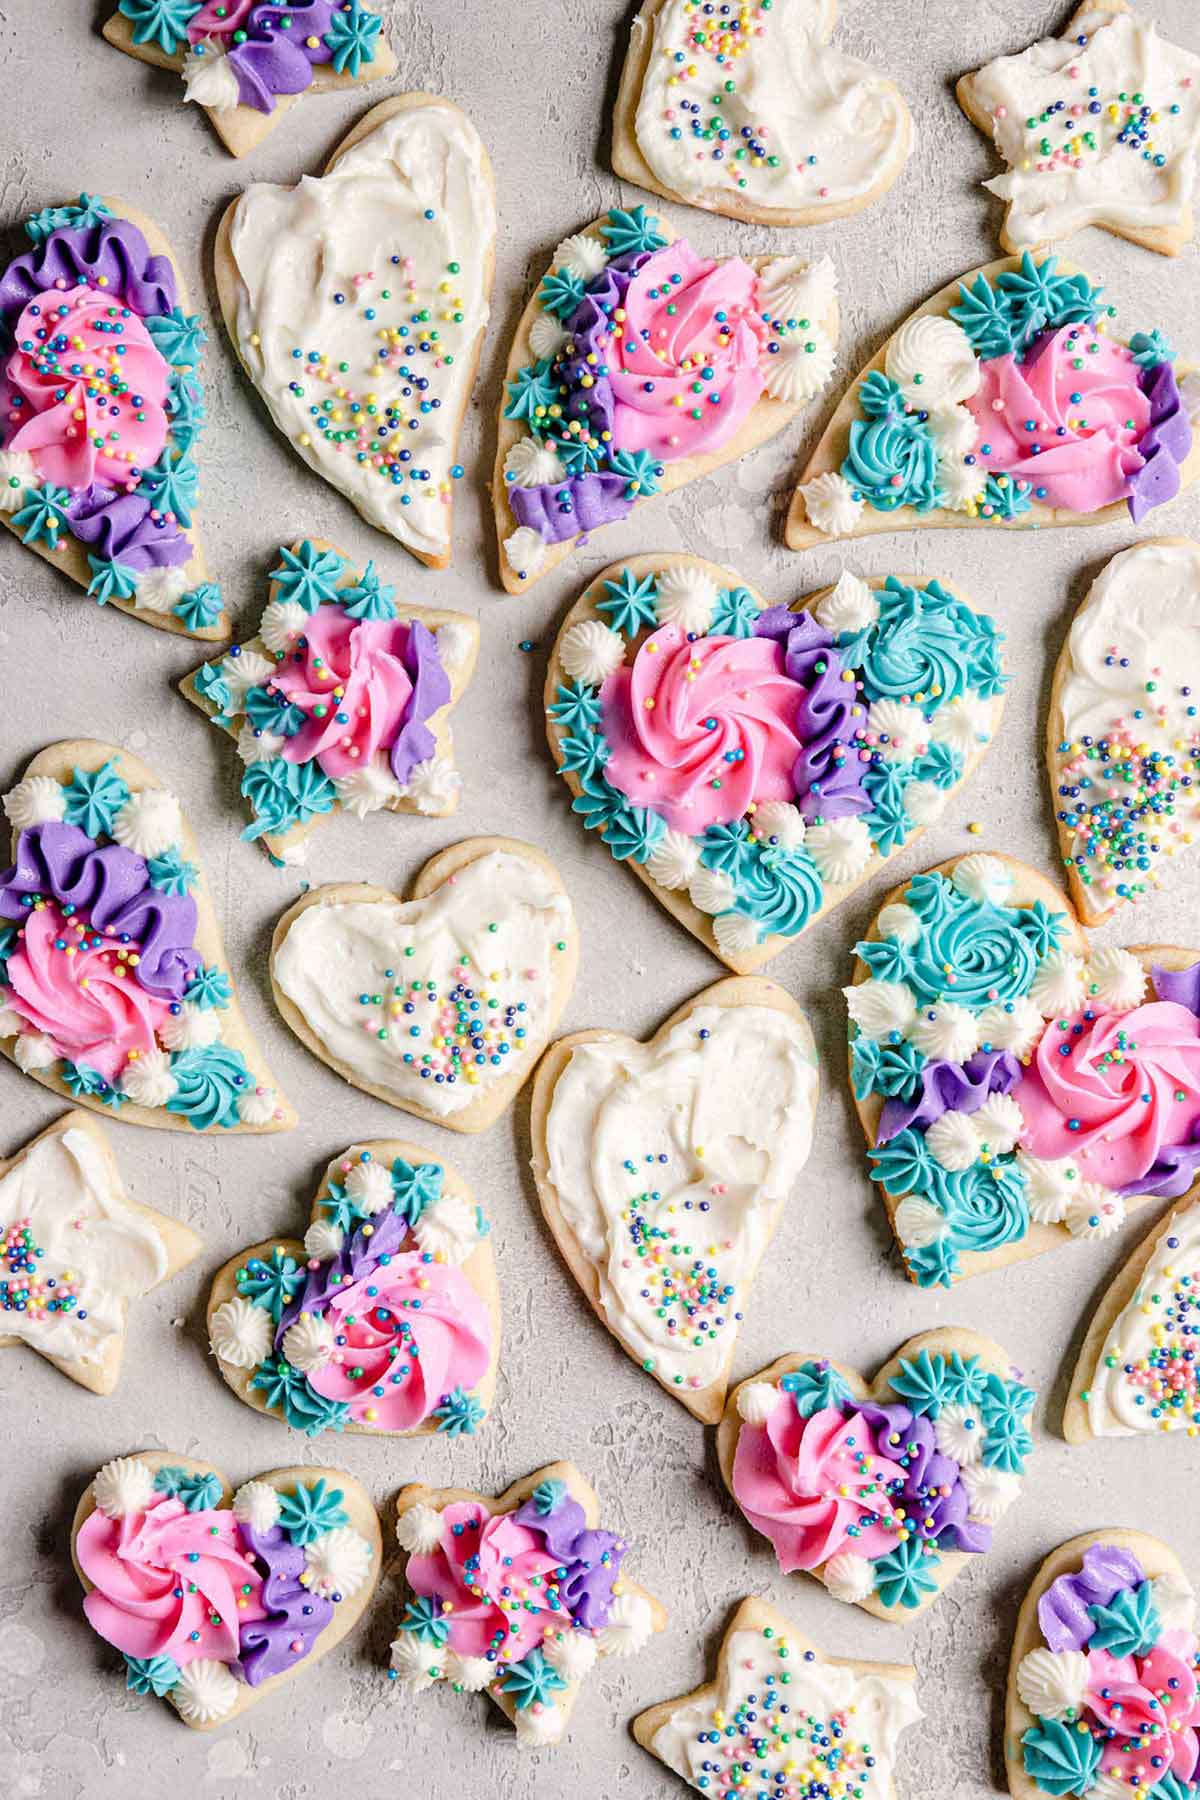 Cut out sugar cookies in various heart designs with buttercream frosting piped on top.